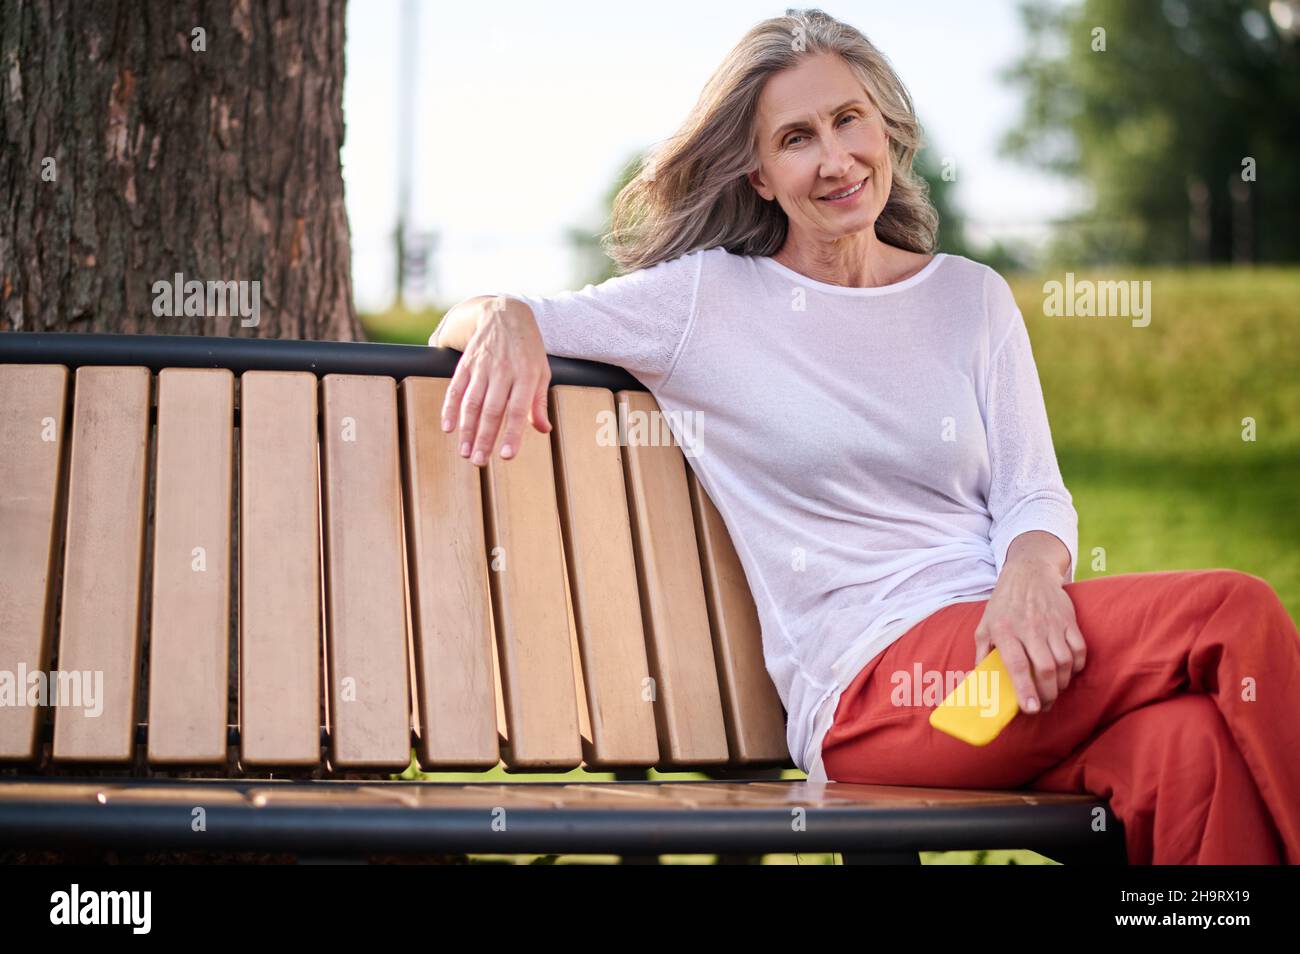 Woman with smartphone sitting on bench in park Stock Photo